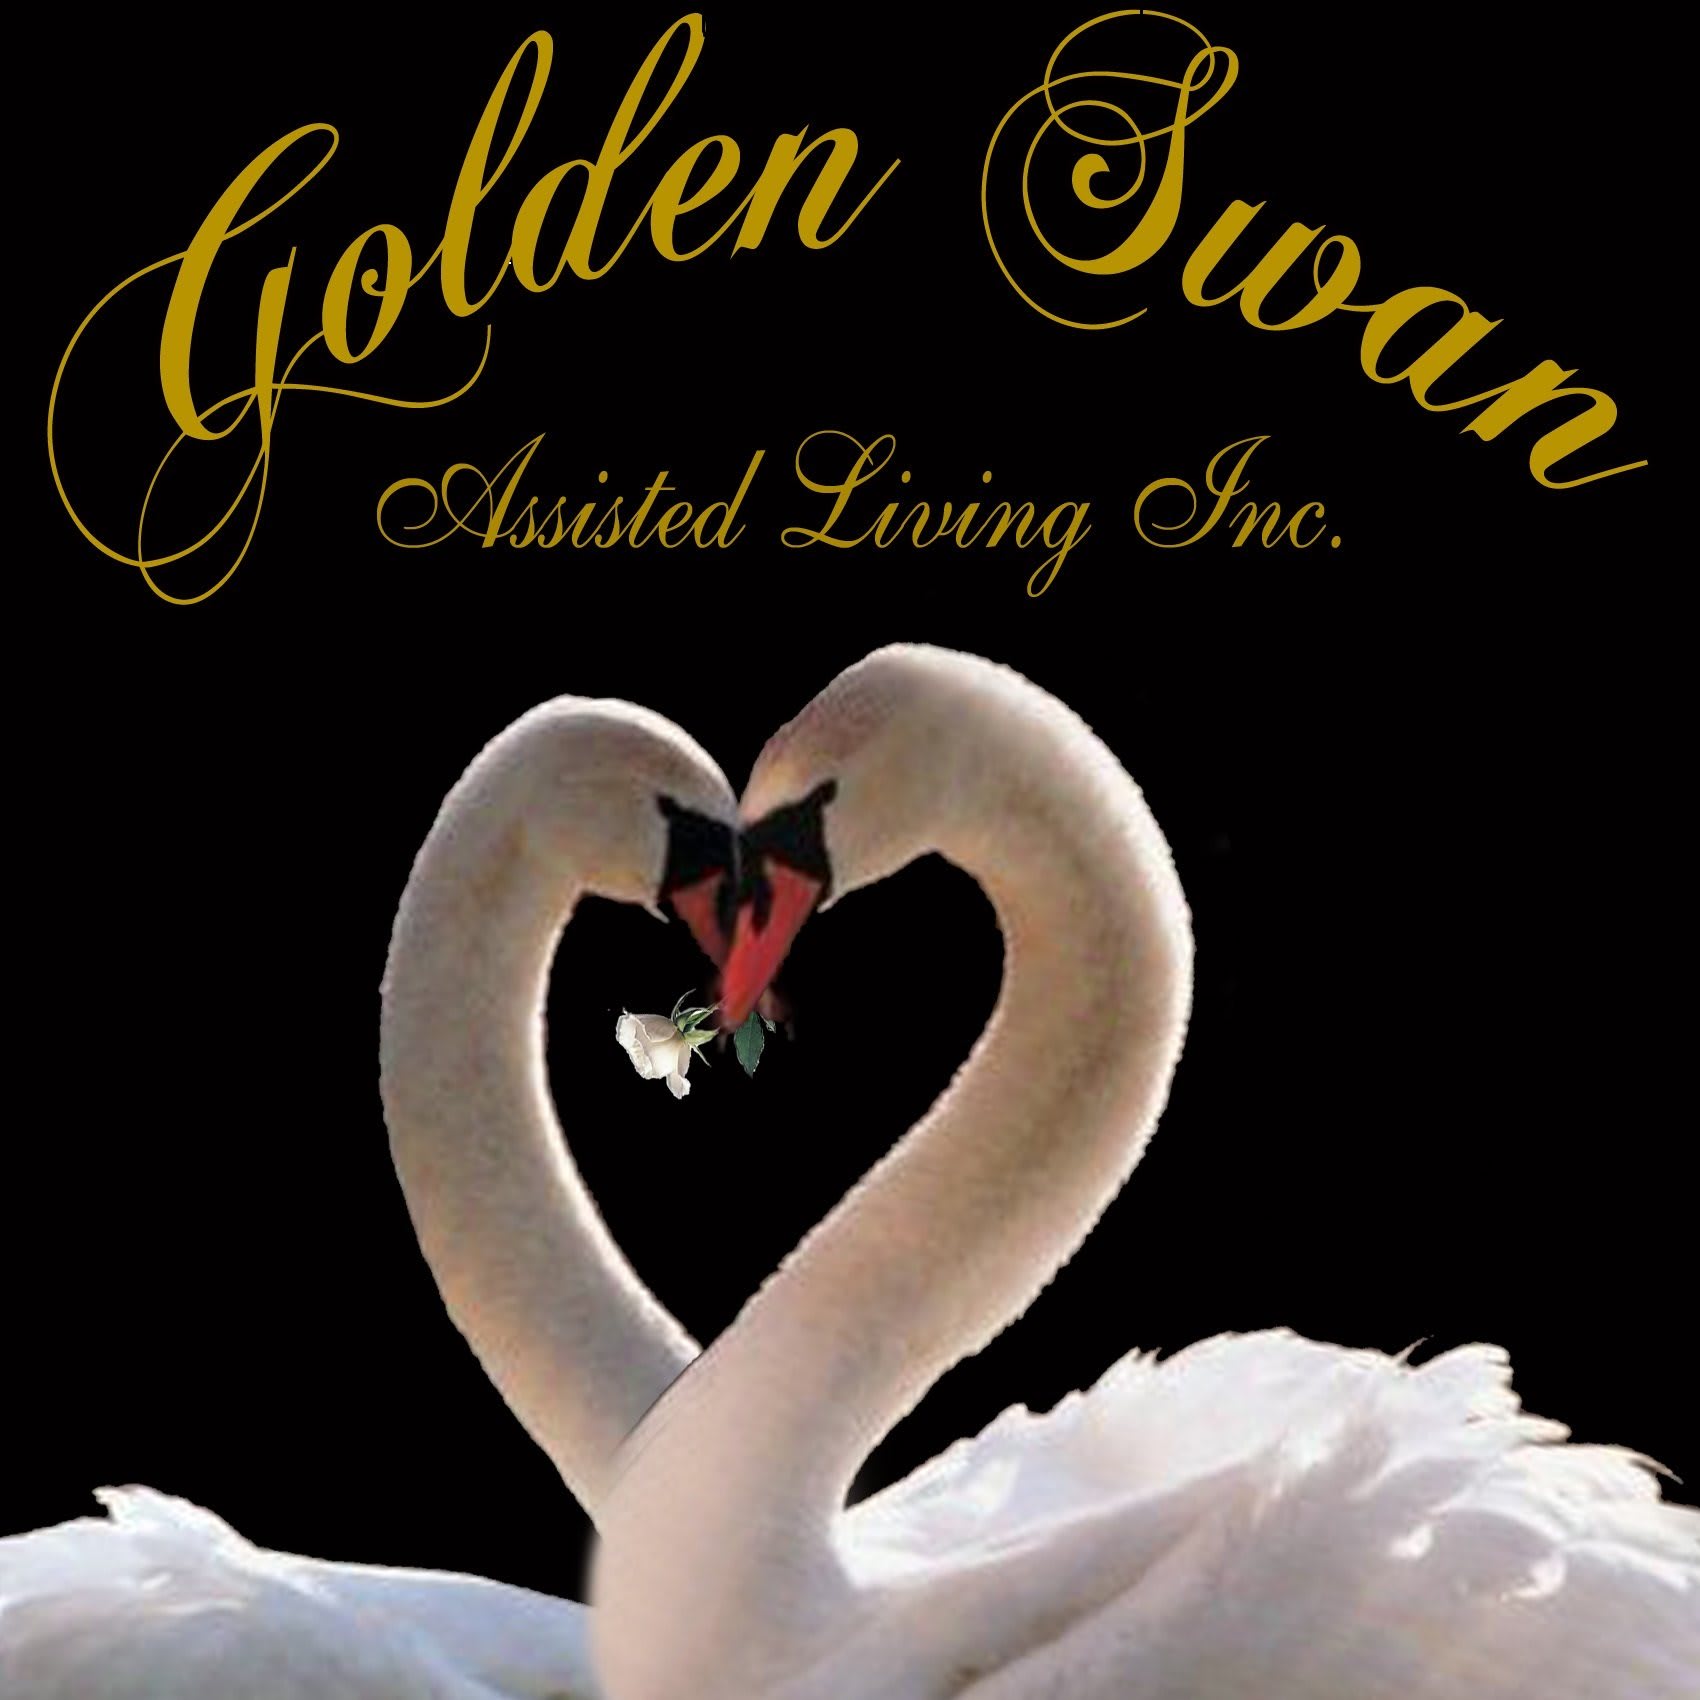 Photo of Golden Swan Assisted Living and Memory Care Facility